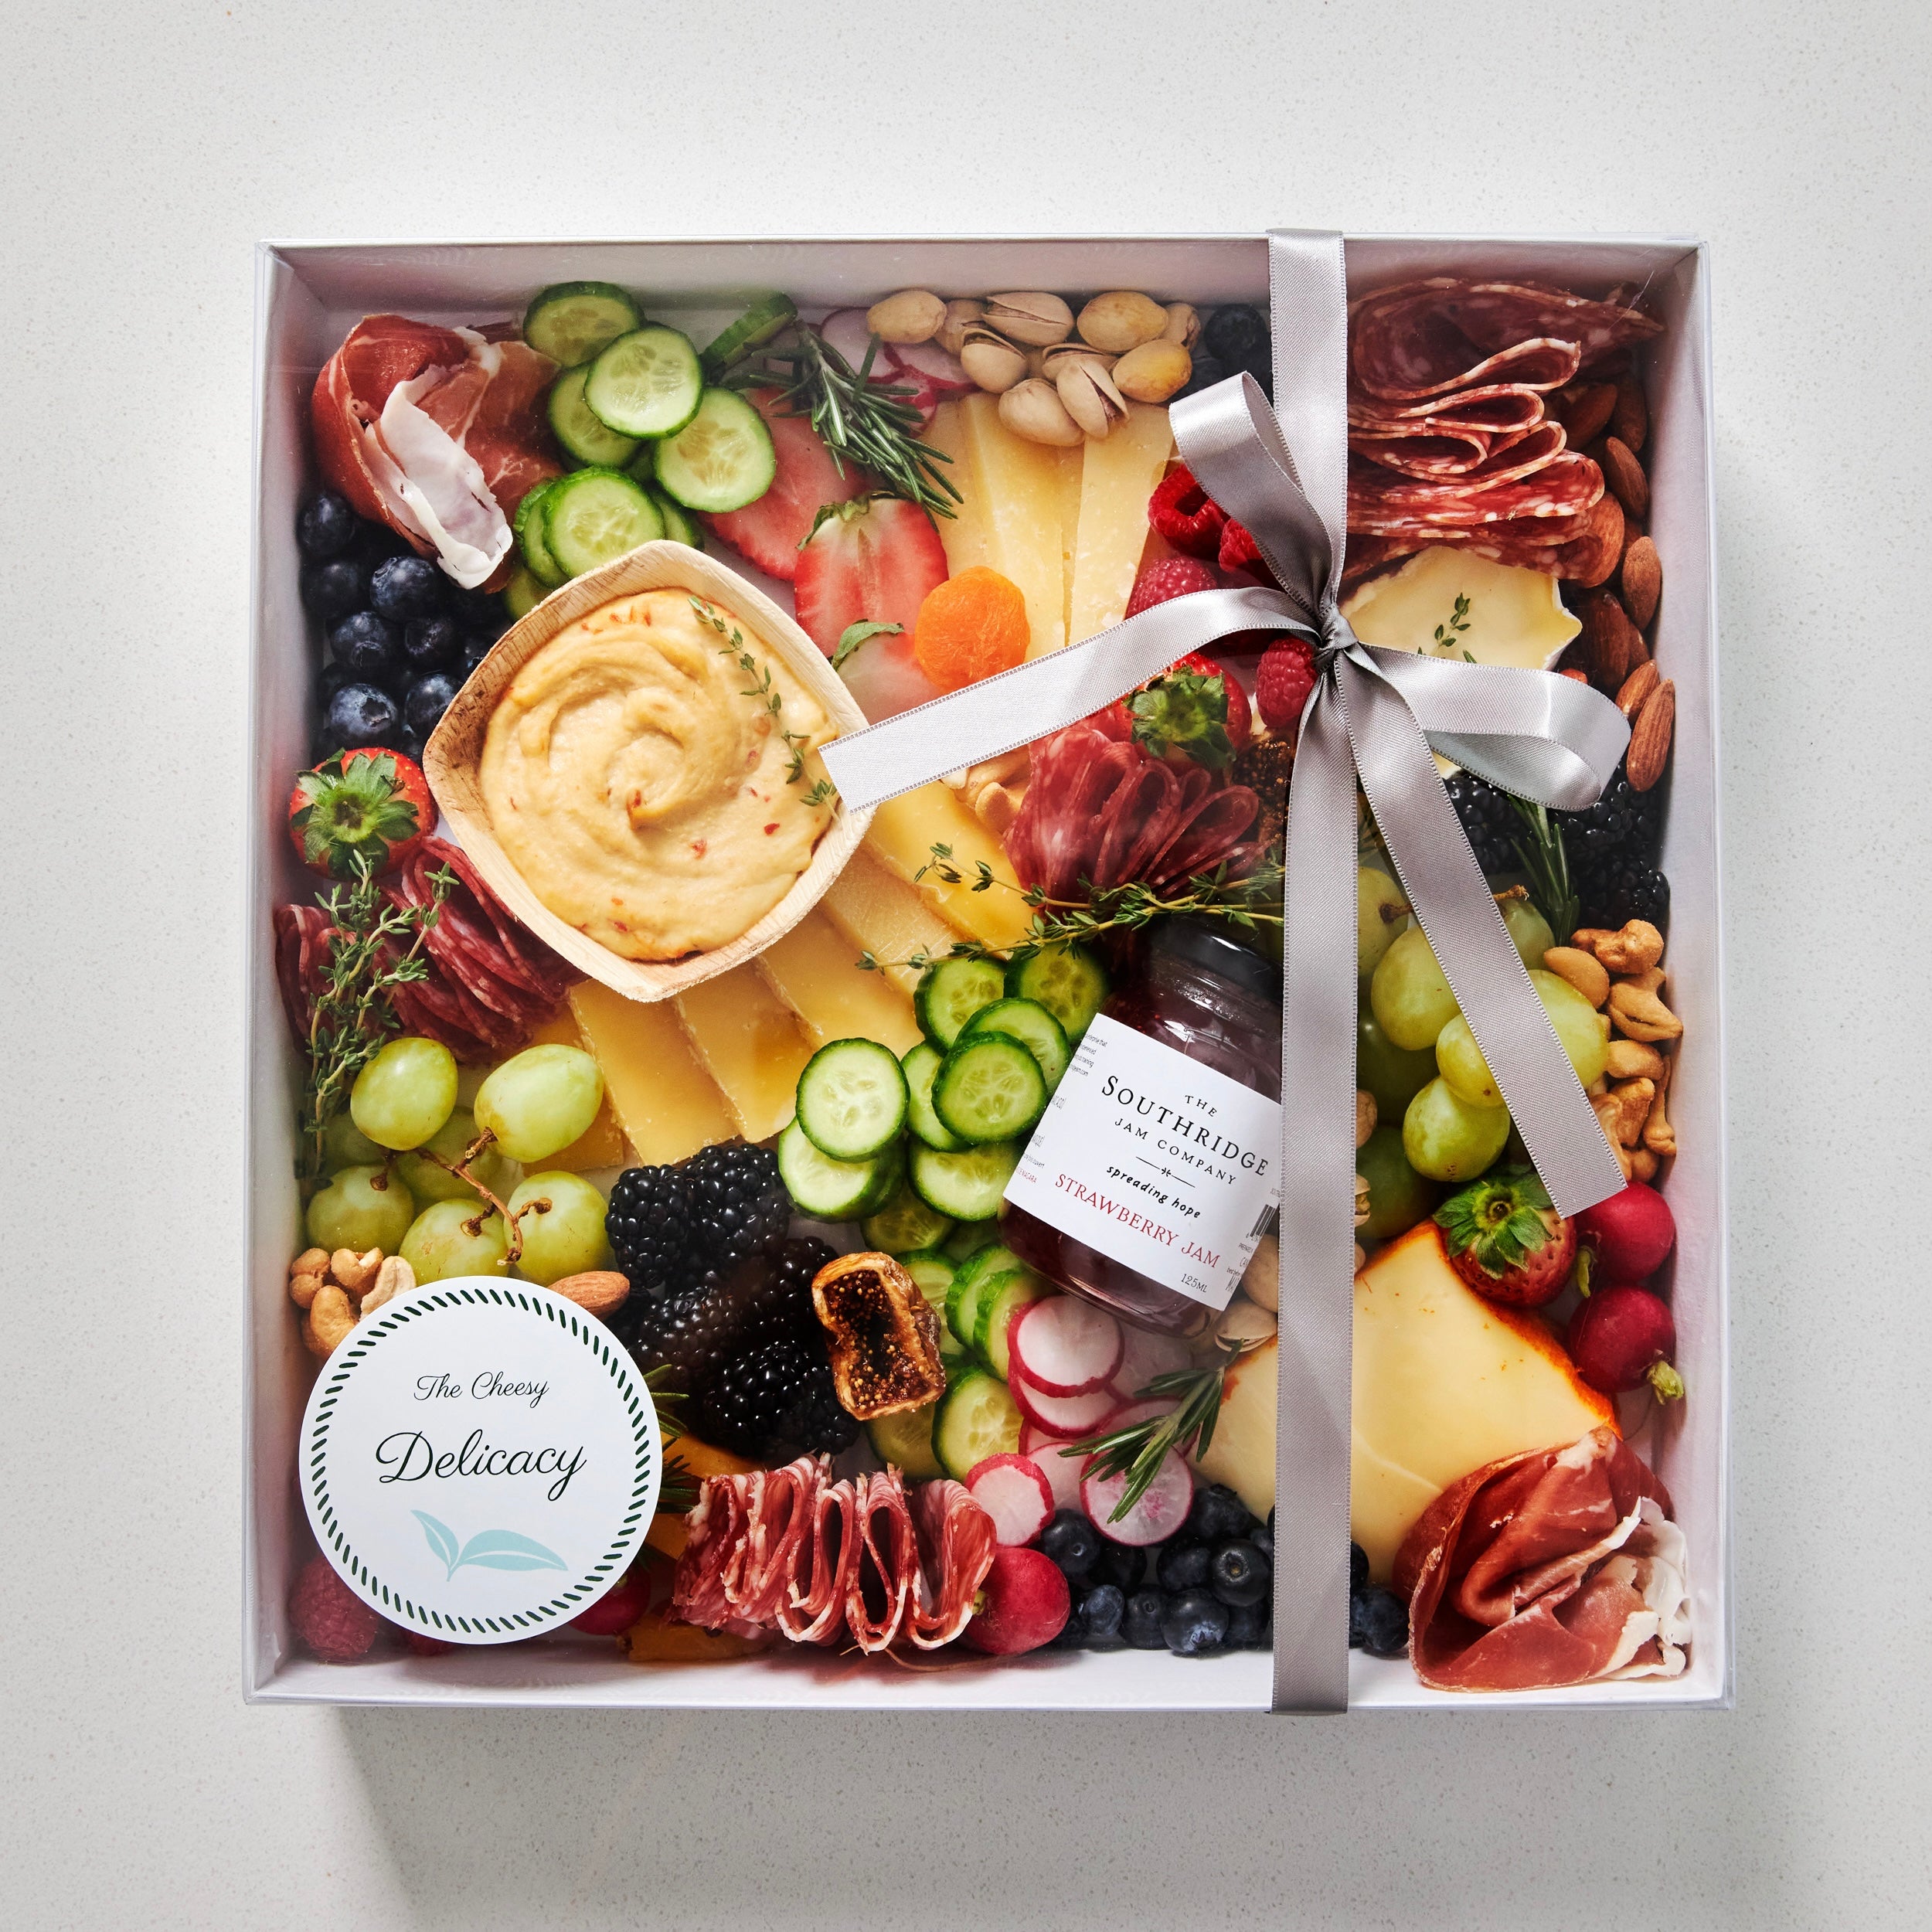 large grazing box with cheese, charcuteries, fruits, vegetables, hummus and jam - packaged